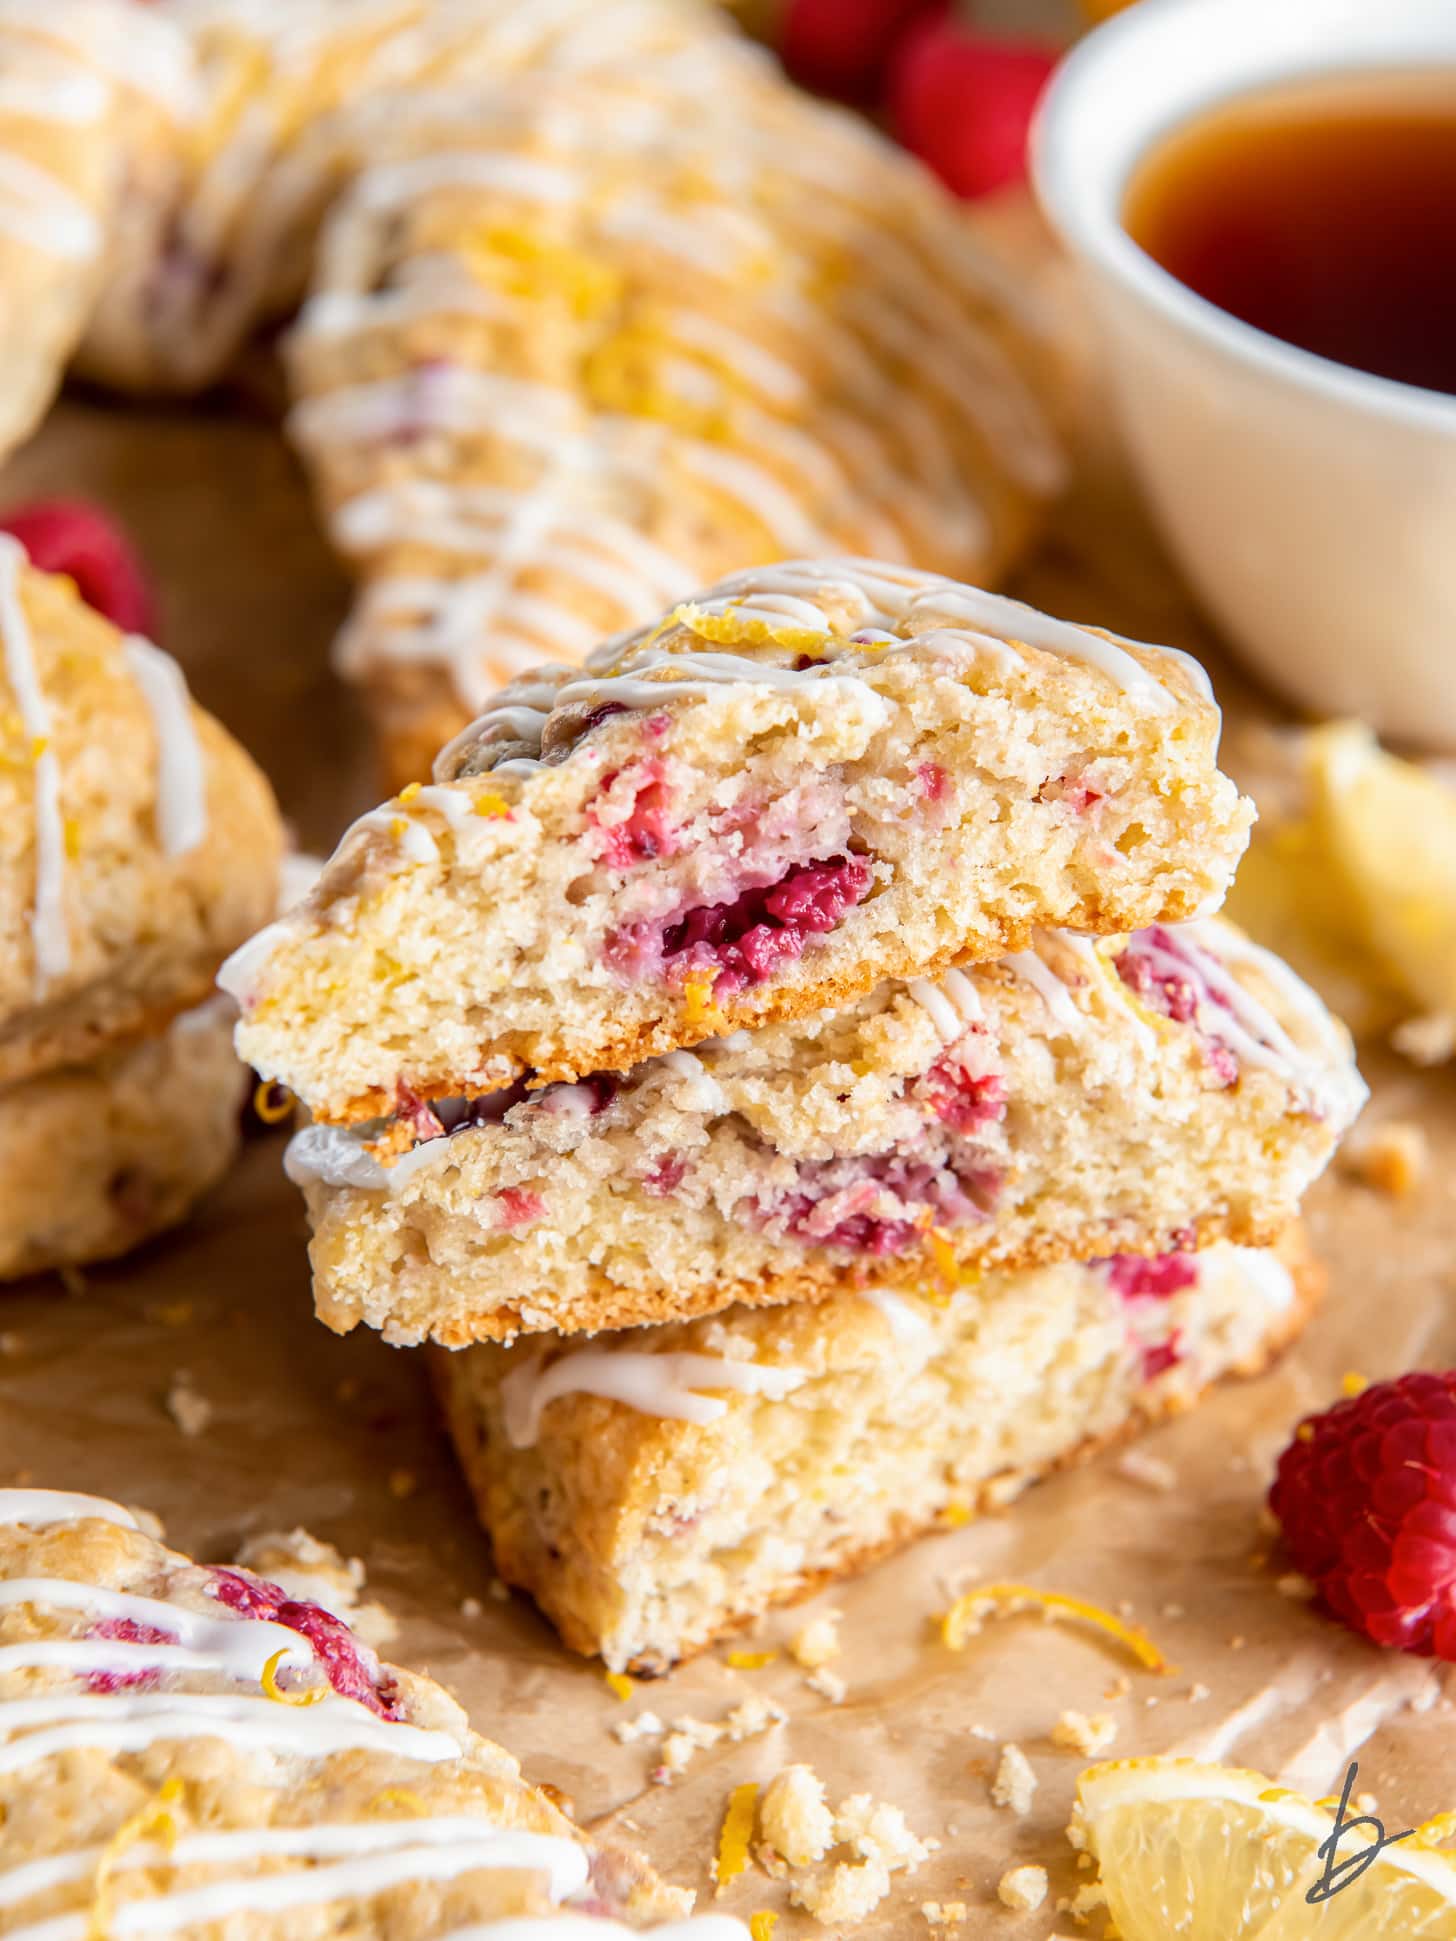 raspberry scones cut in half and stacked on top of each other showing flaky layers and raspberries inside.